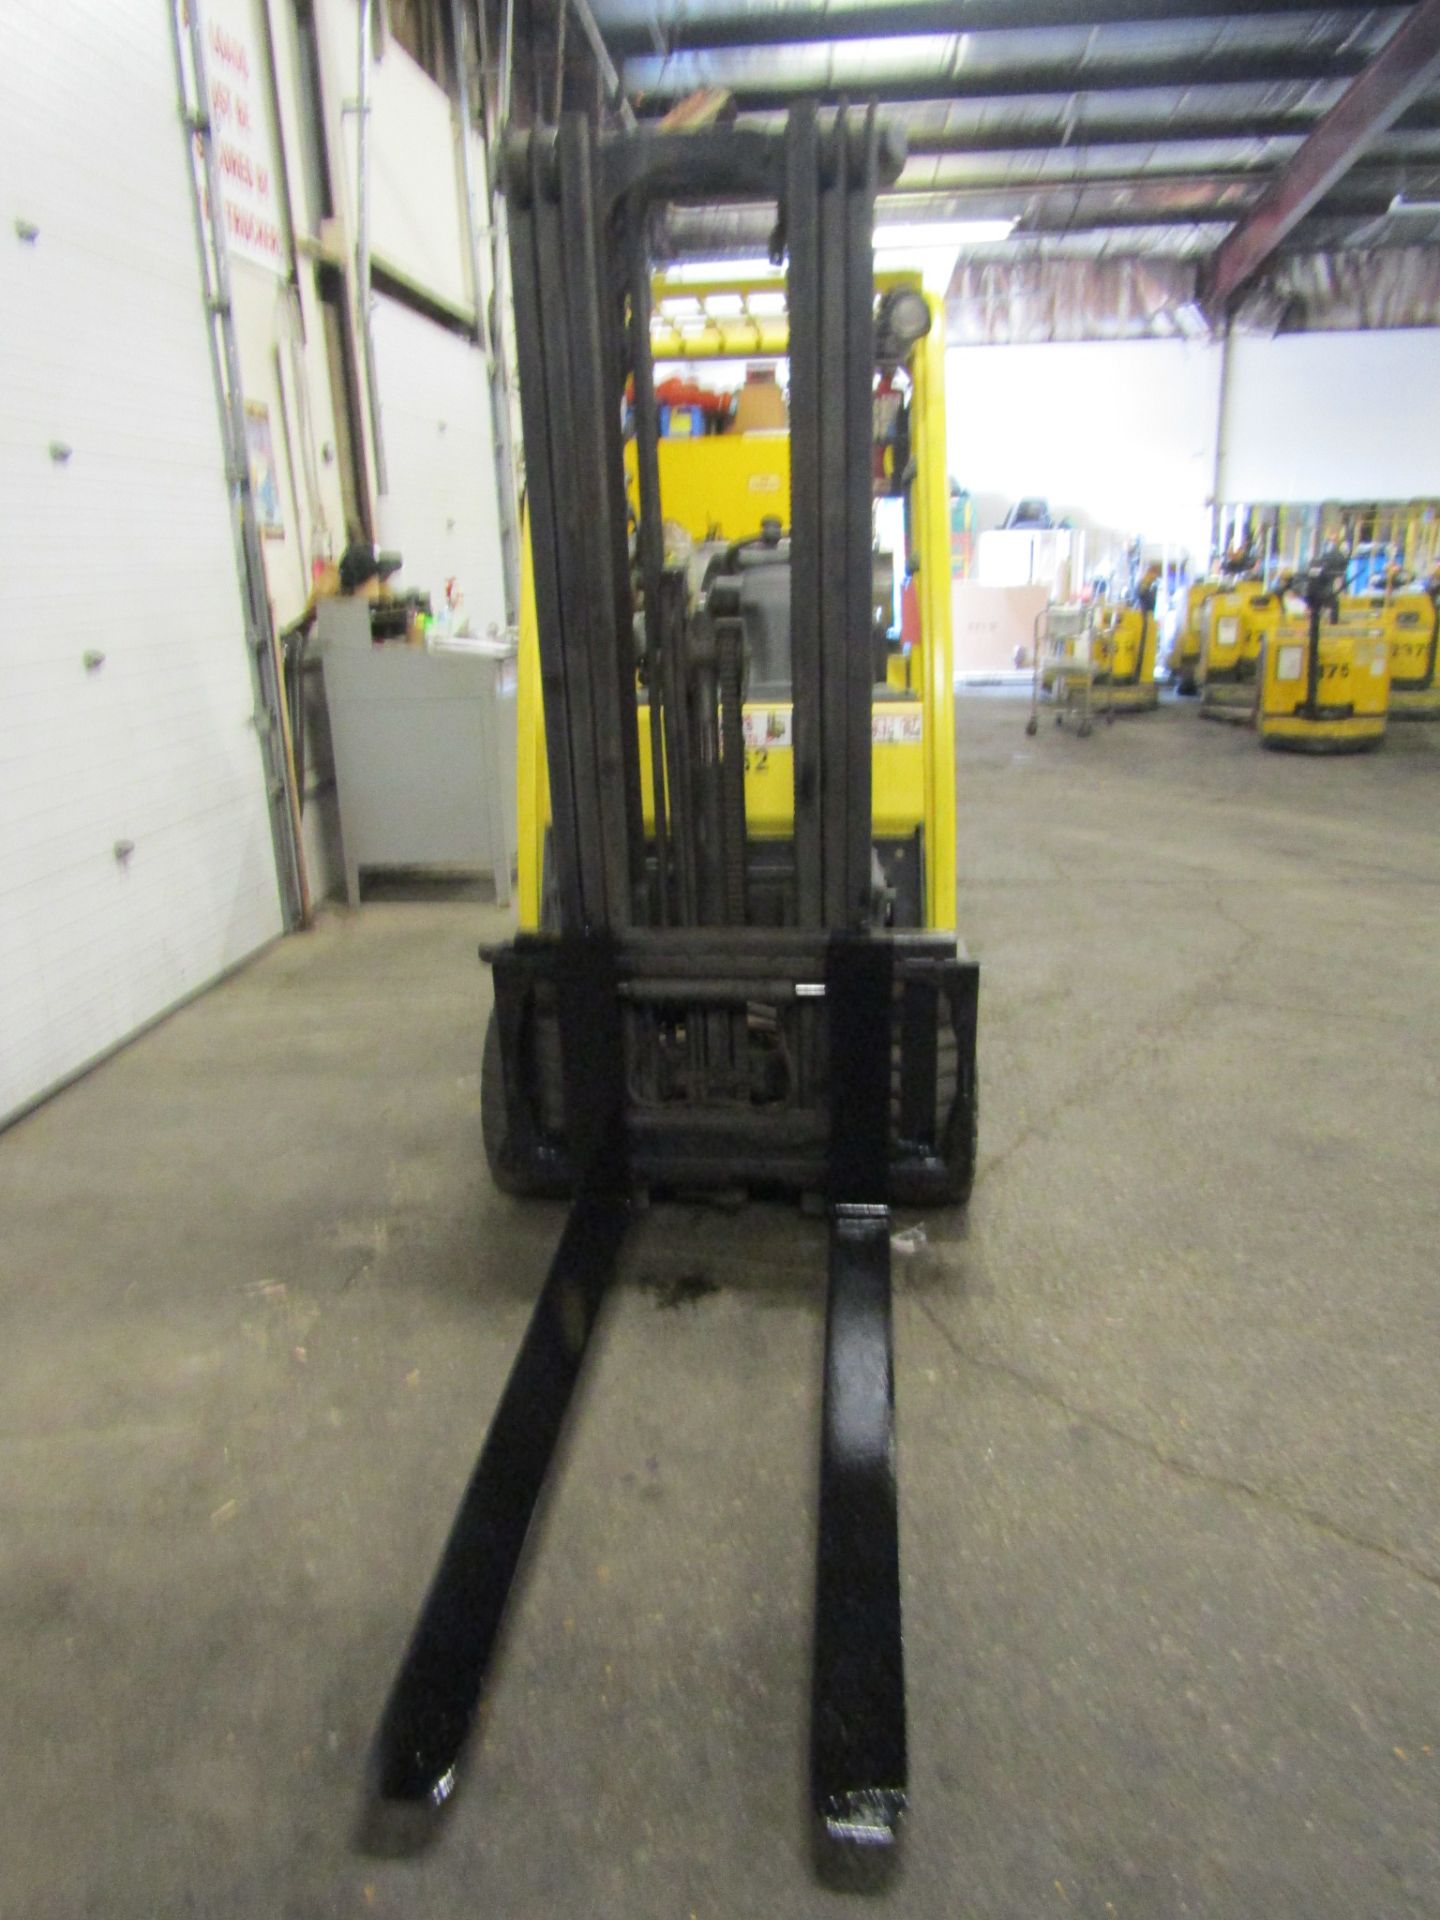 2011 Hyster 6000lbs Capacity Forklift with 3-stage mast - LPG (propane) with sideshift (no propane - Image 2 of 2